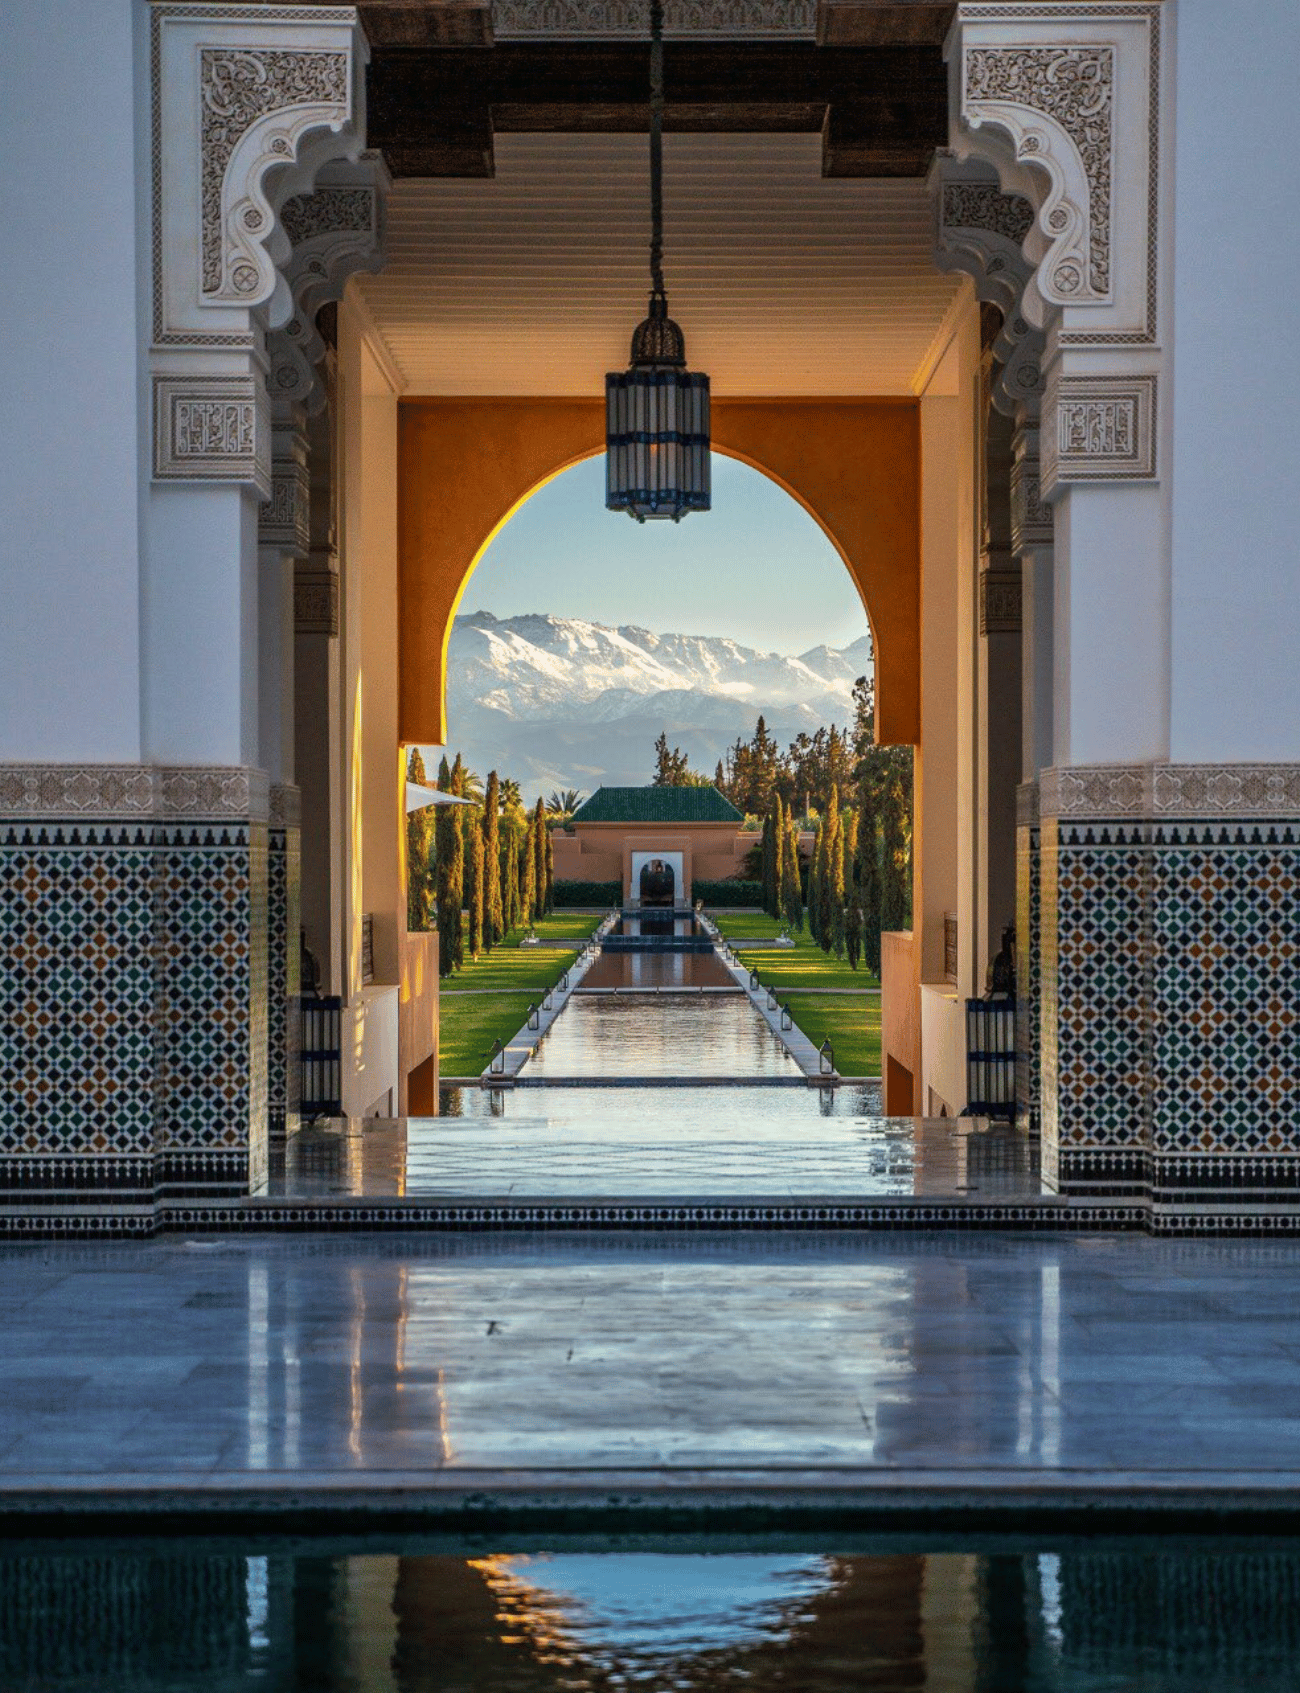 Experience opulent accommodations on your private luxury trip to Morocco at this exquisite hotel.